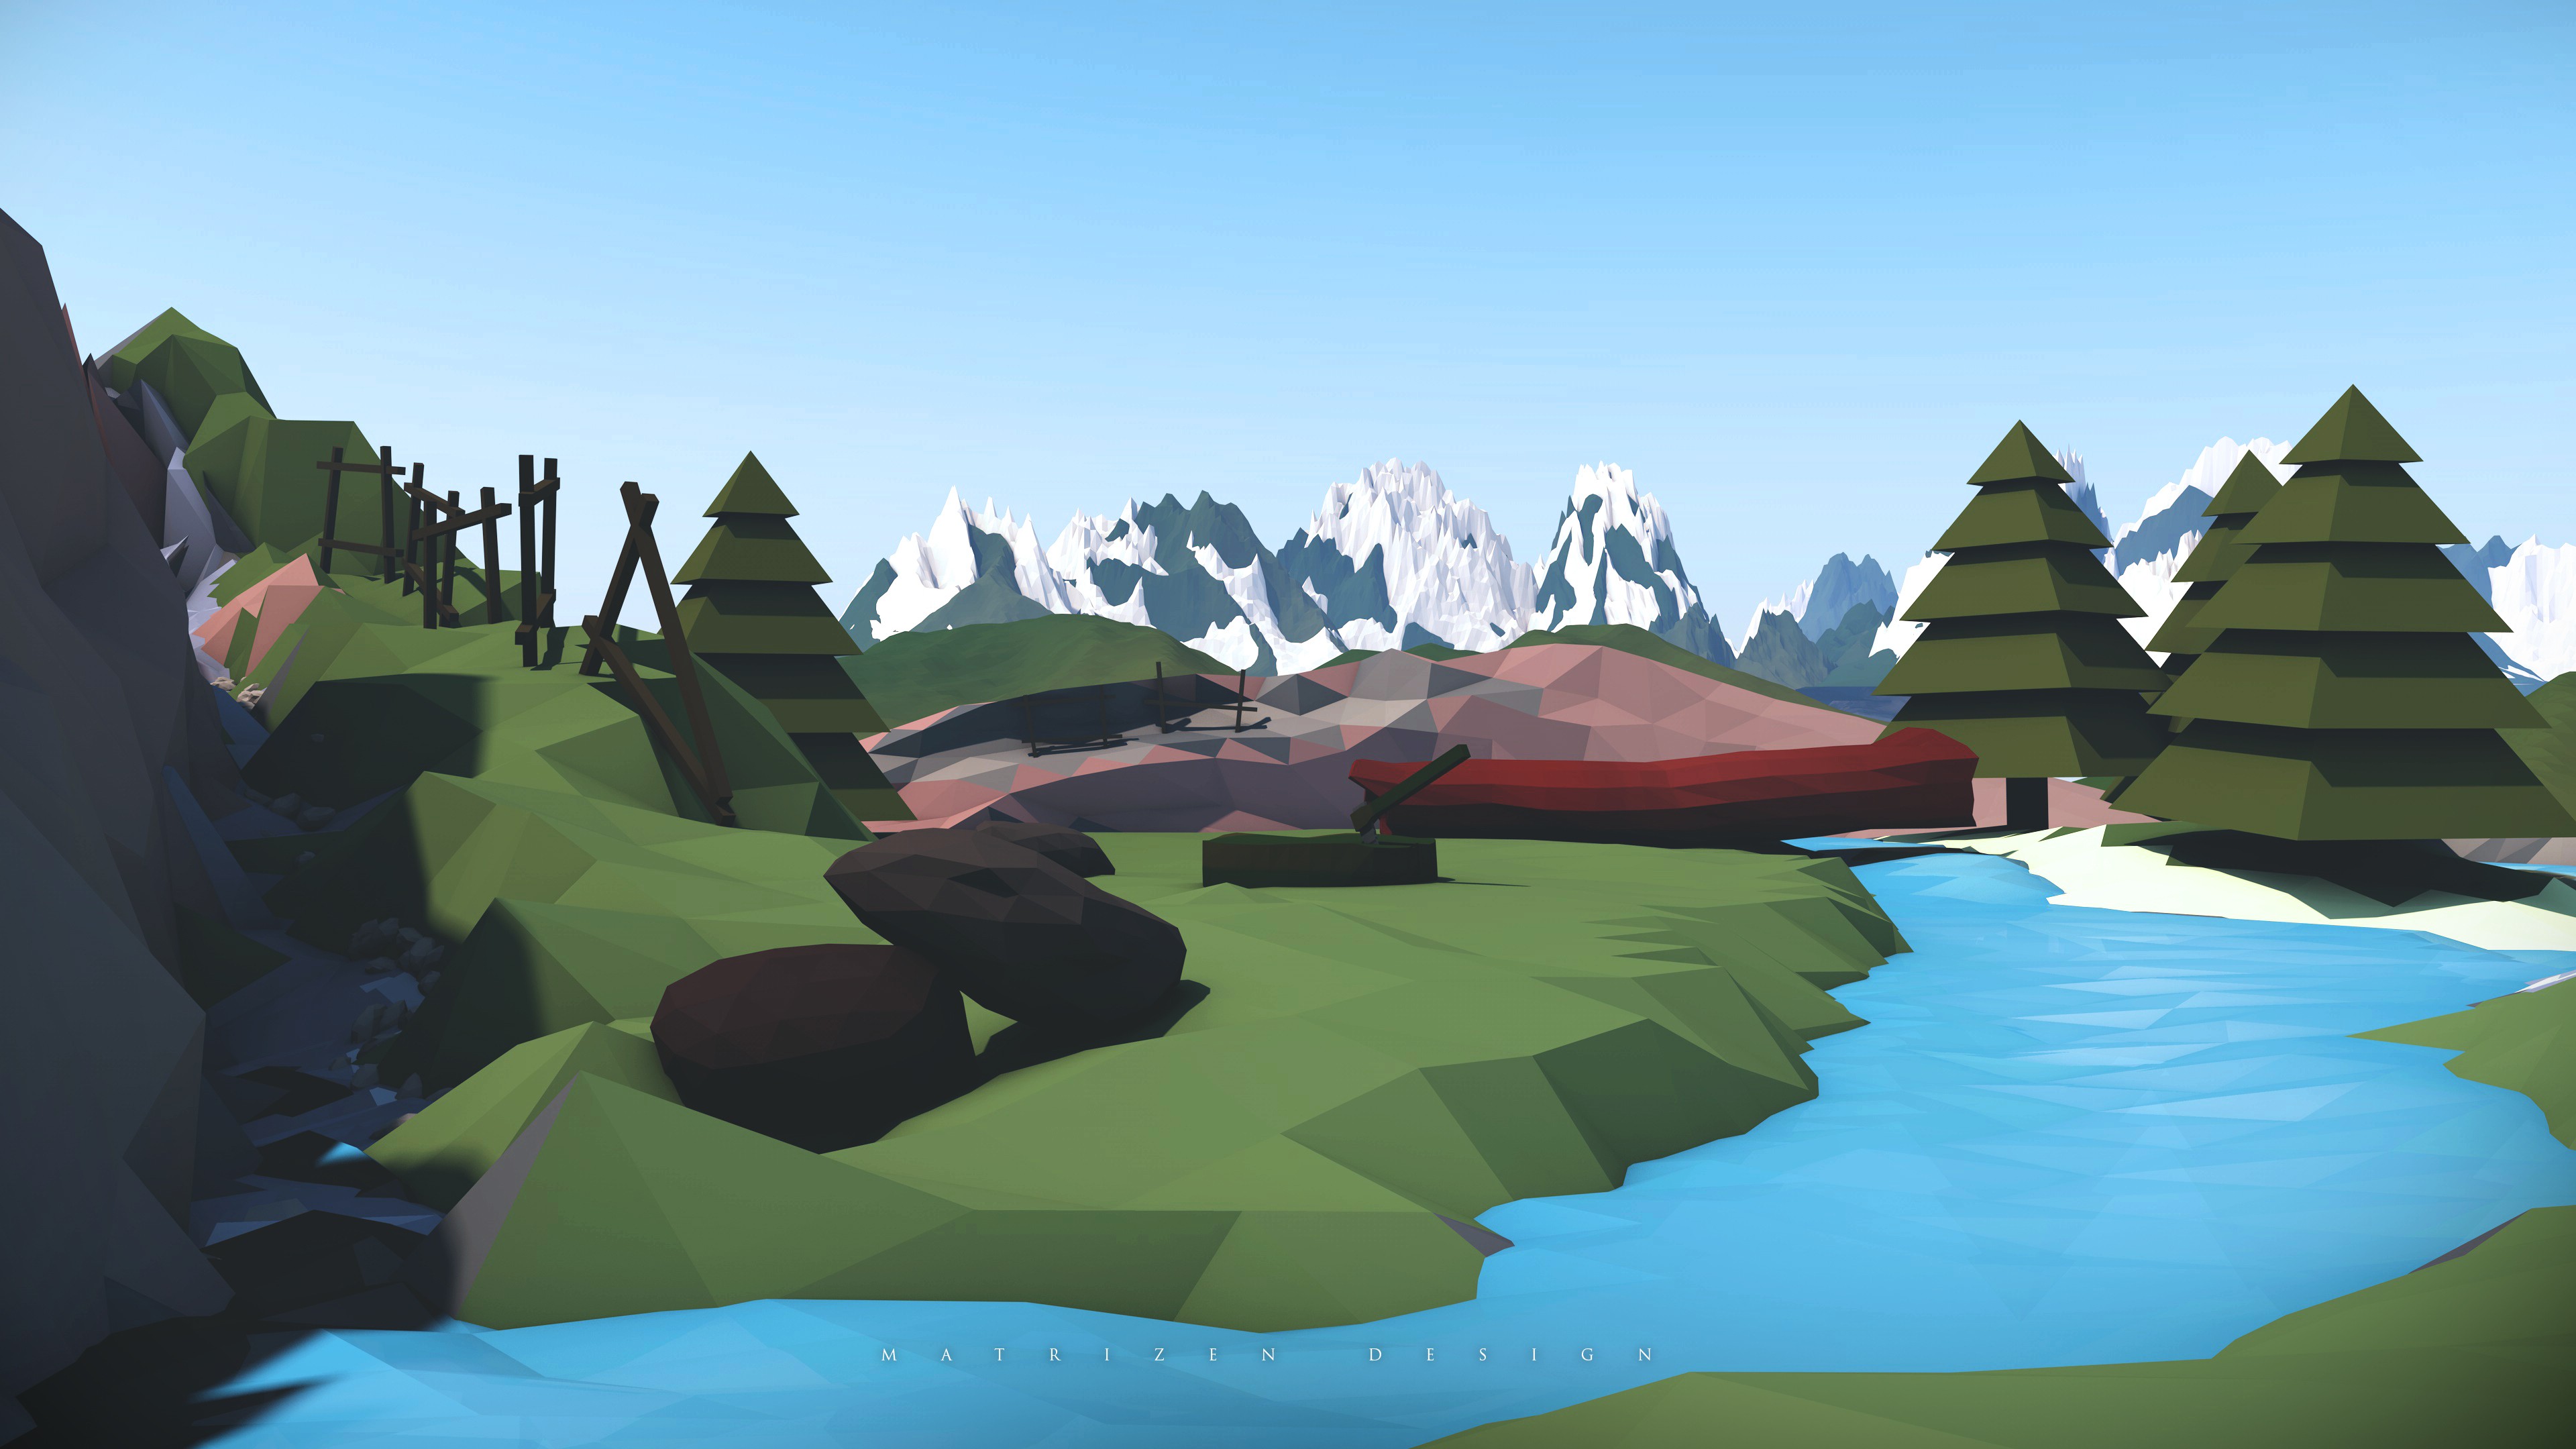 Low Poly Landscape Mountains Mist Dead Trees Forest River Water Stones Fence Trunks Axe Hills Digita 3840x2160